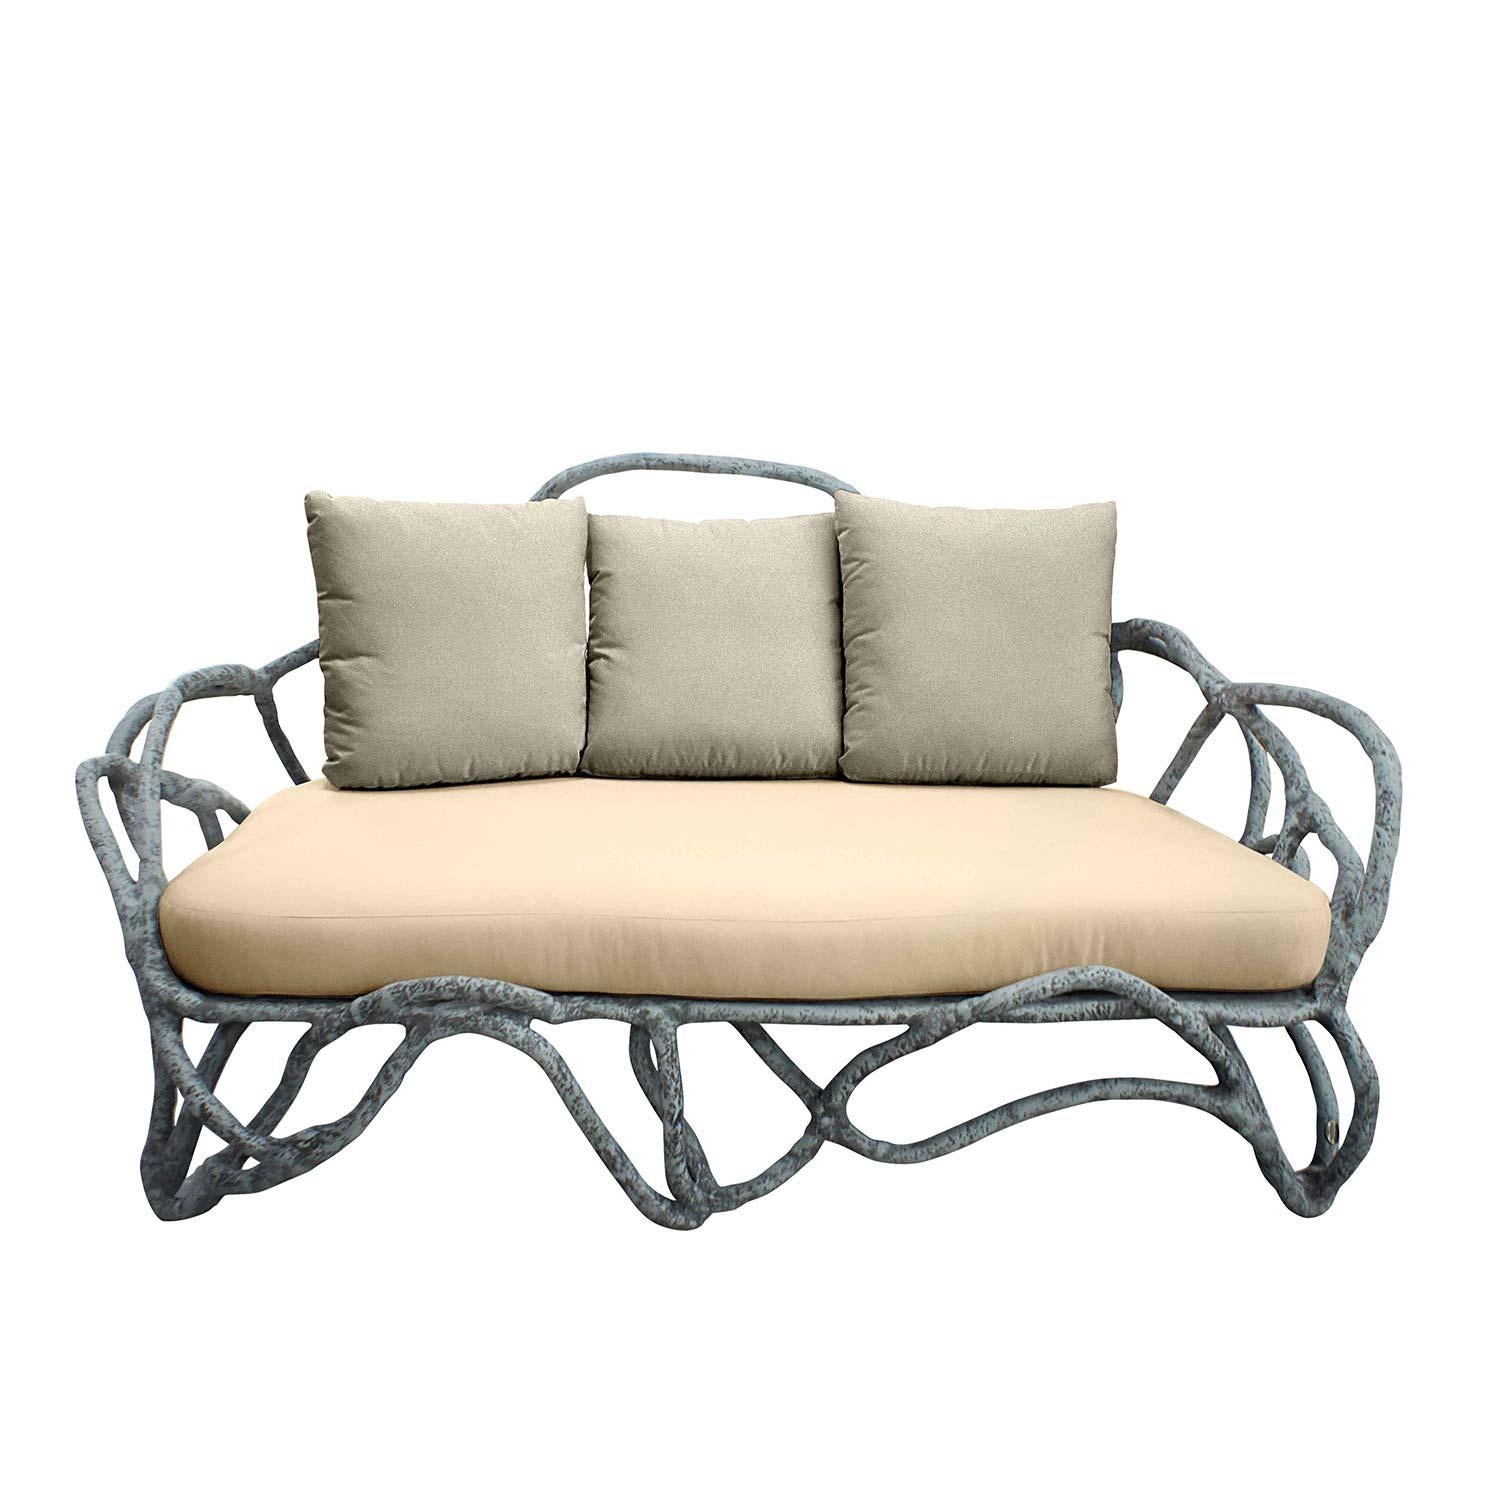 Contemporary garden sofa crafted of fiberglass-reinforced acrylic resin in aged concrete finish. The reinforced resin is forceful enough to withstand extreme weather conditions without cracking or changing color.
Structure: Fiberglass-reinforced